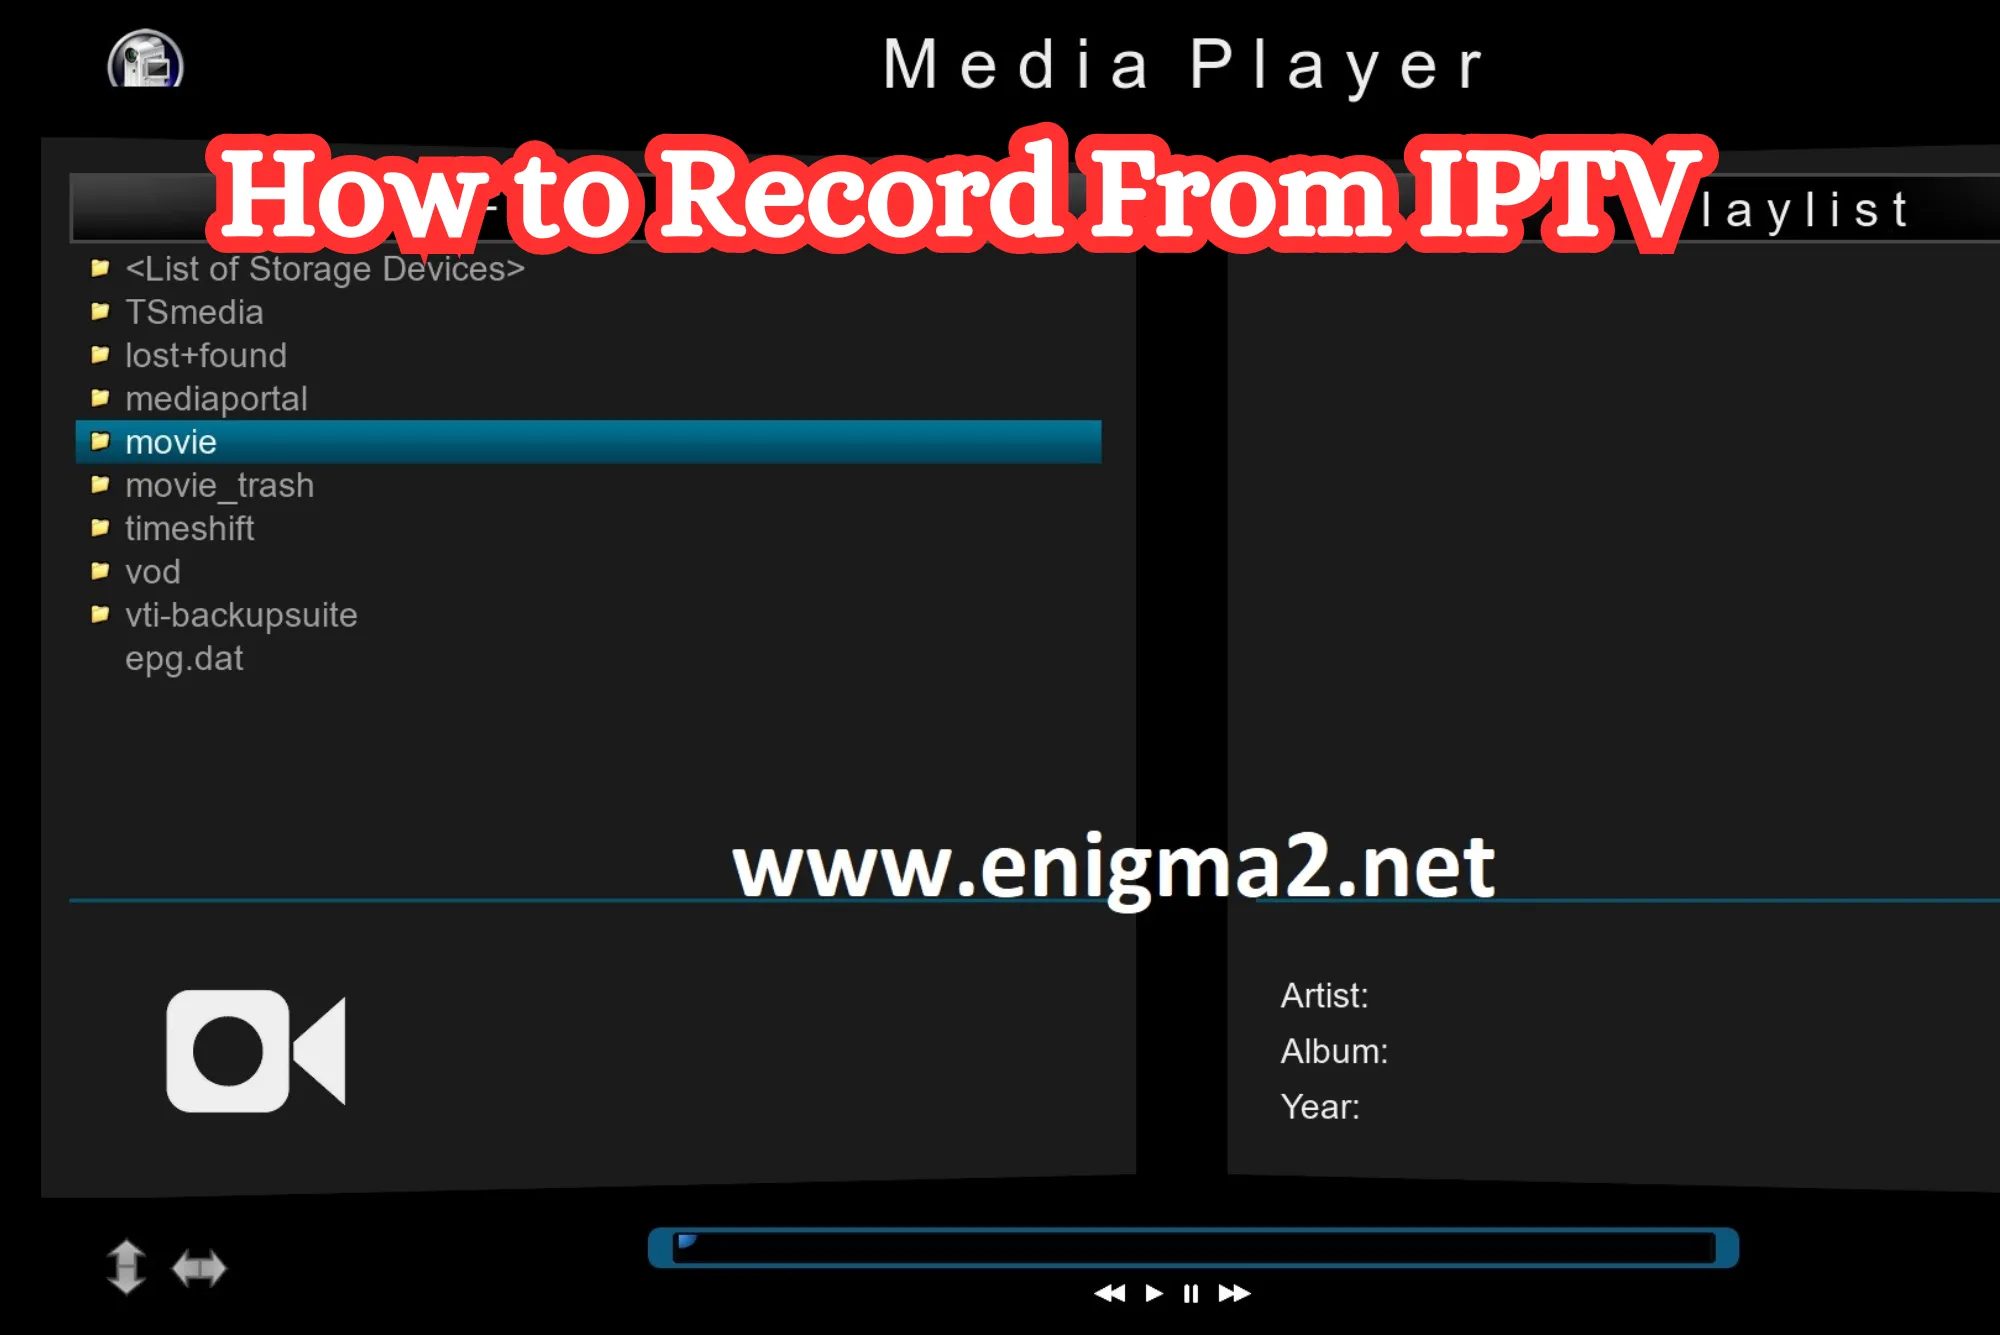 How to Record From IPTV